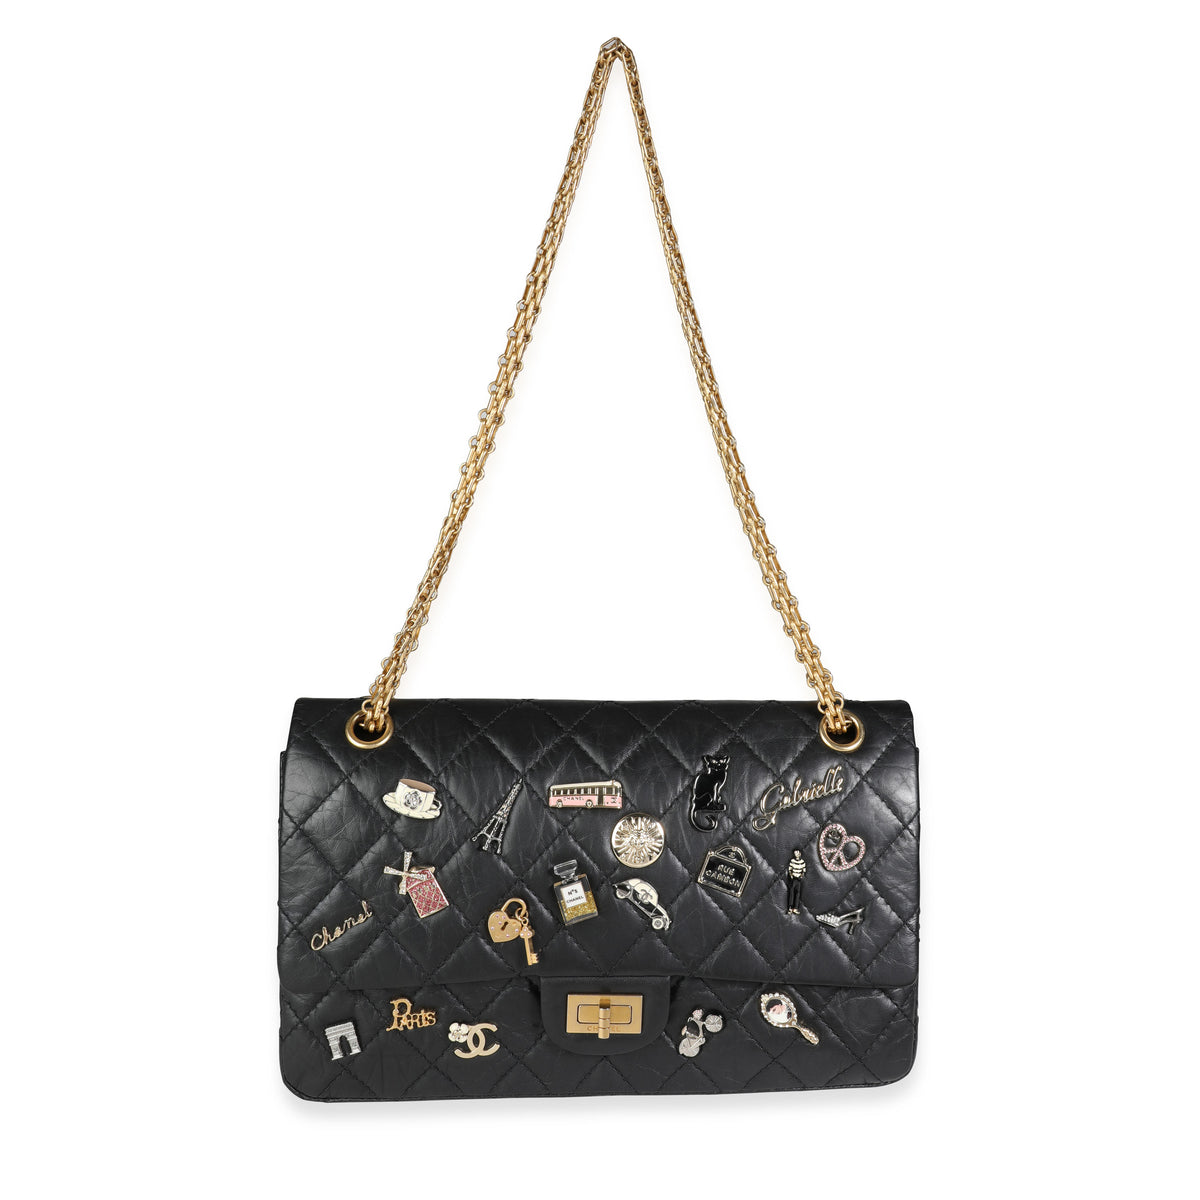 Chanel Black Quilted Calfskin Lucky Charms Reissue 2.55 226 Flap Bag, myGemma